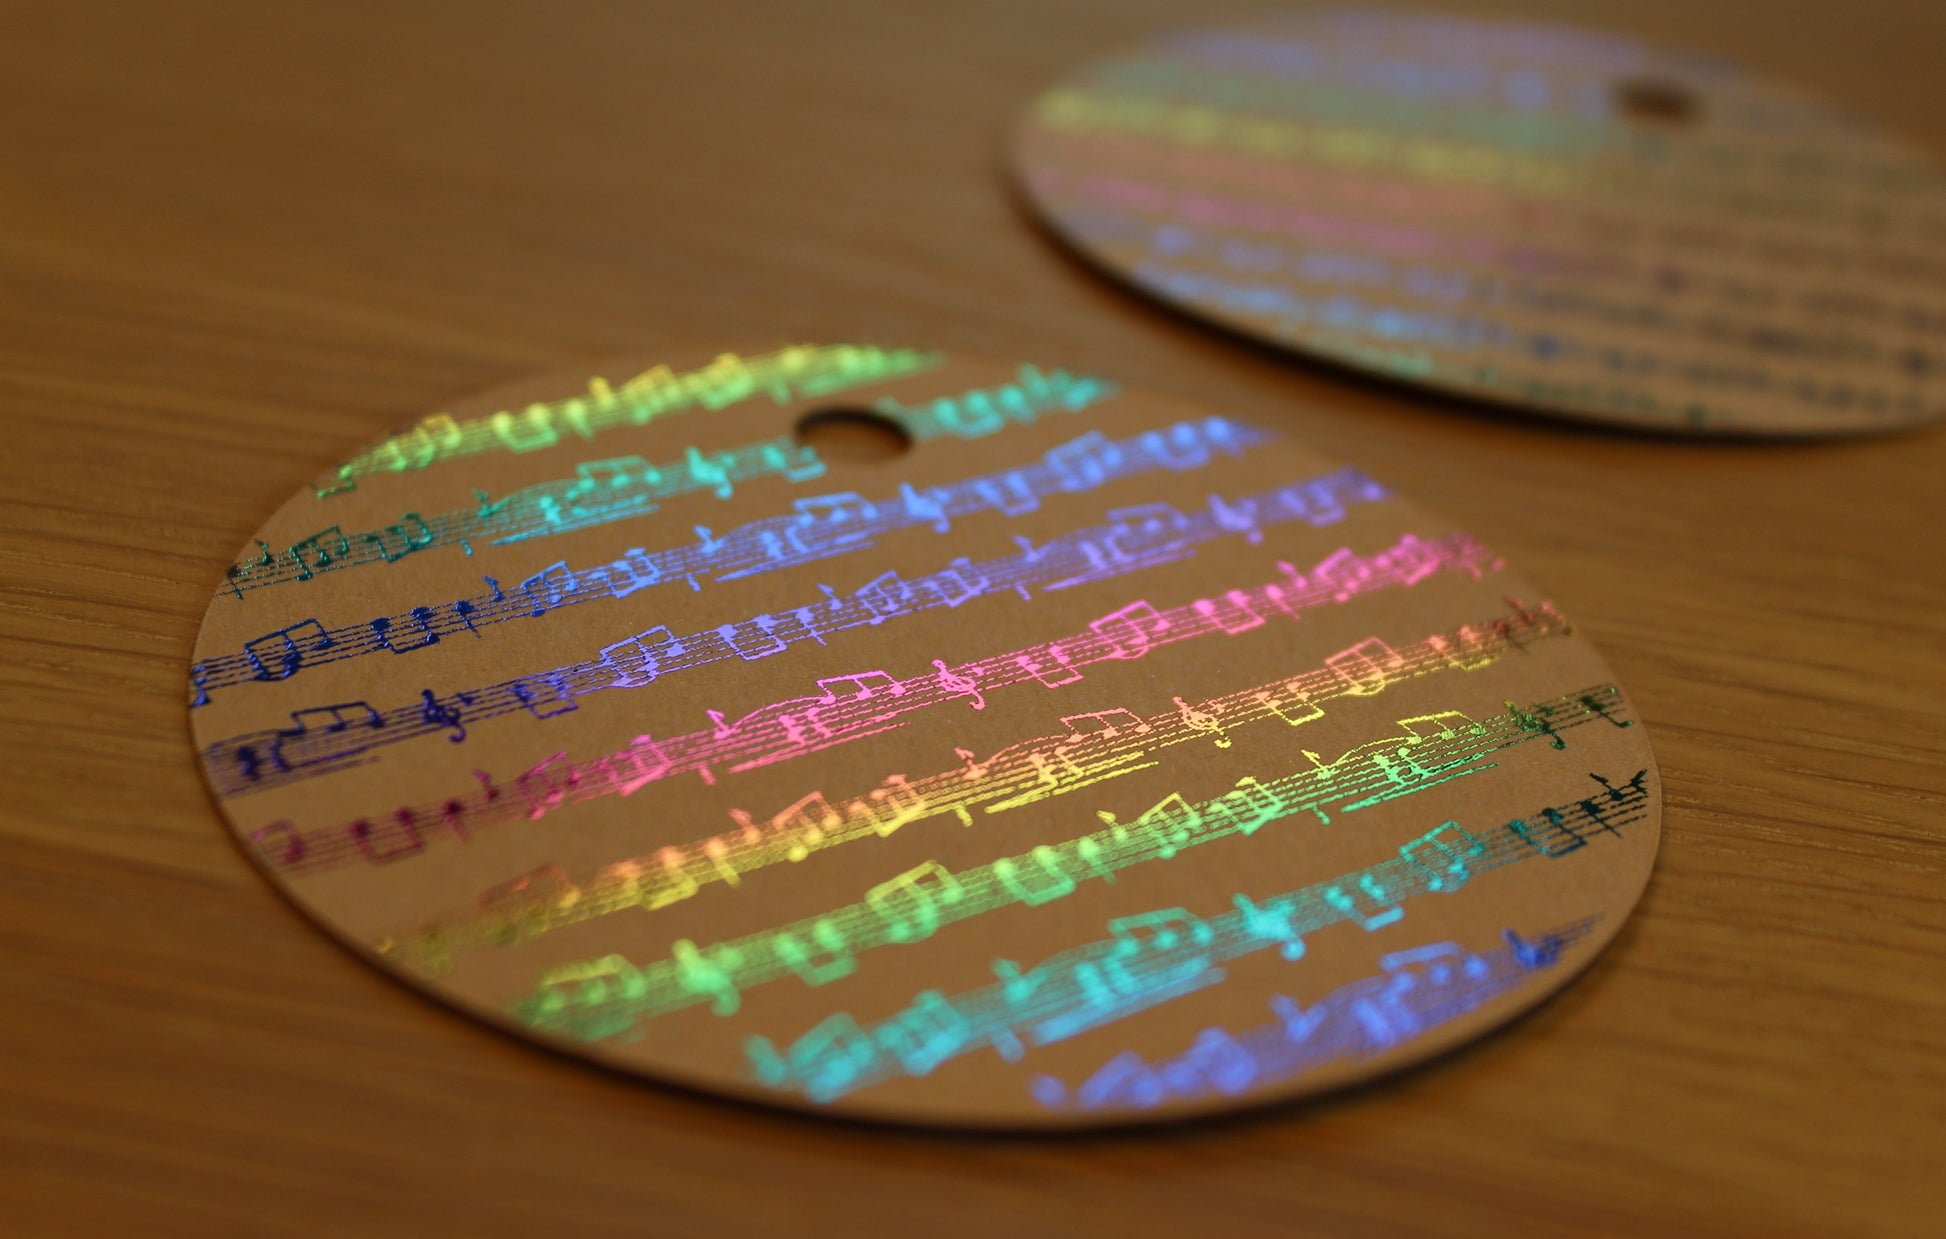 Round brown kraft gift tag. Design of rows of music in a multicoloured shiny foil.